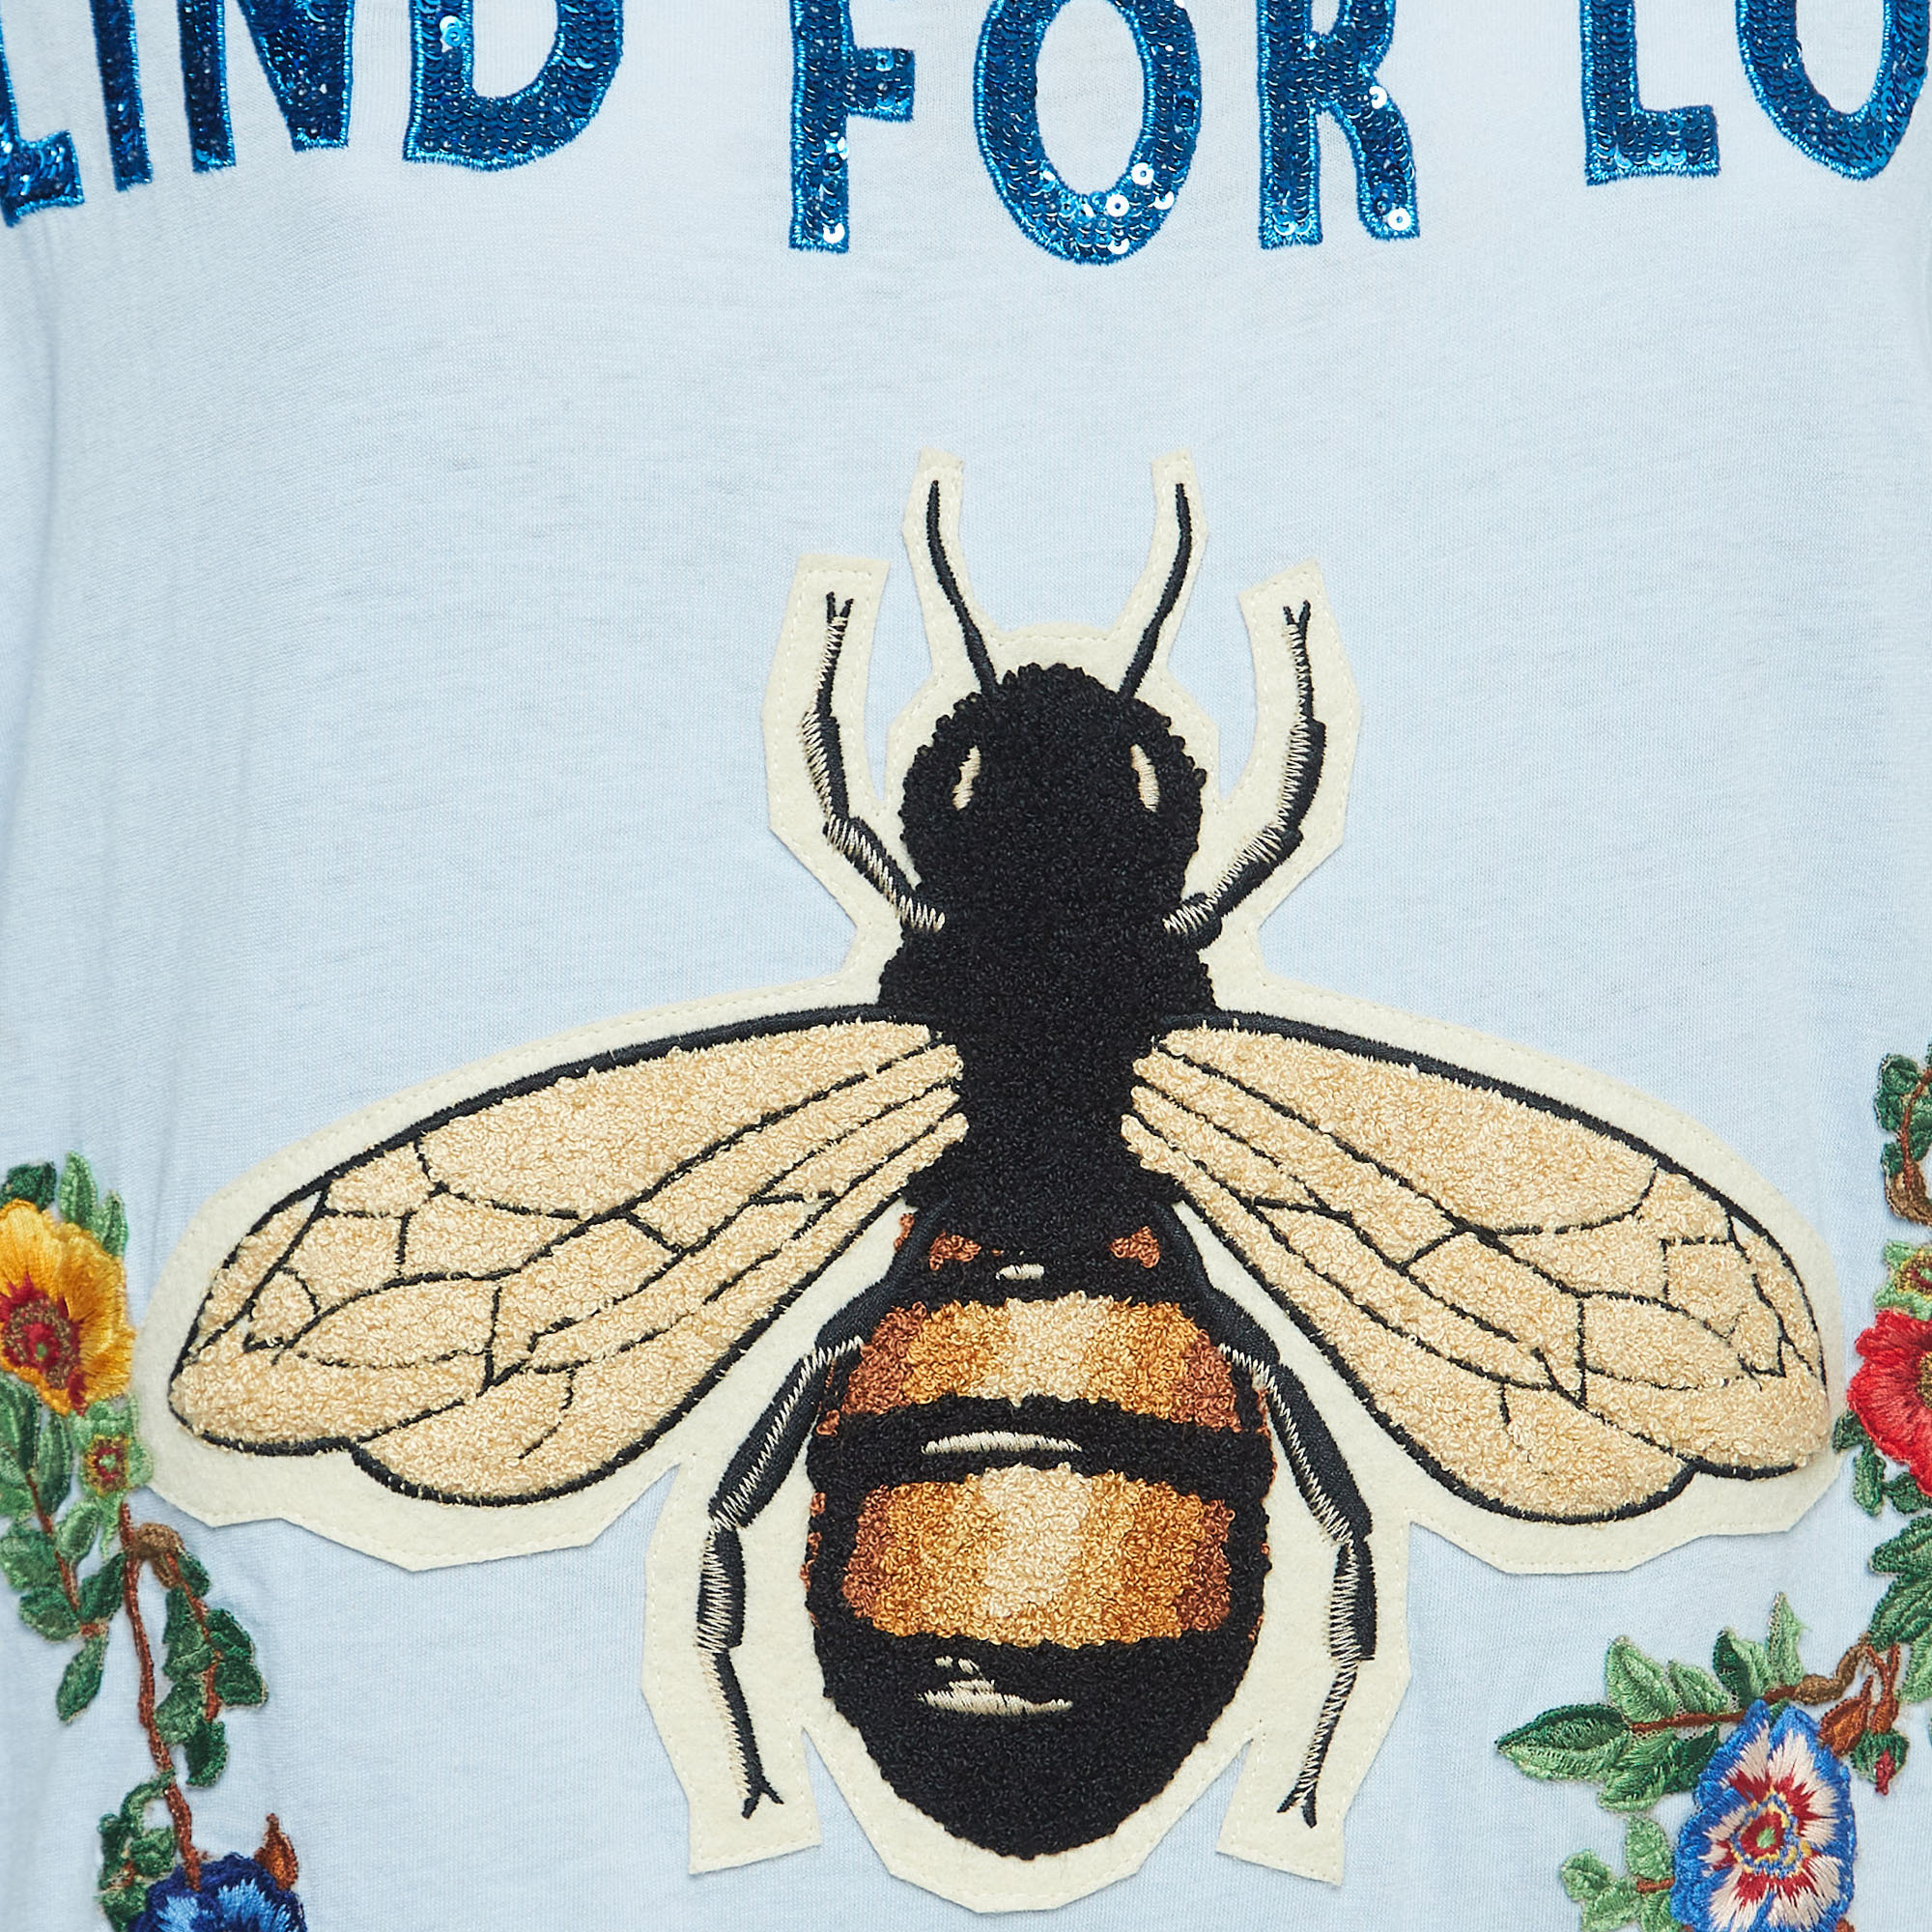 Gucci Light Blue Bee Embroidered Cotton T-Shirt S